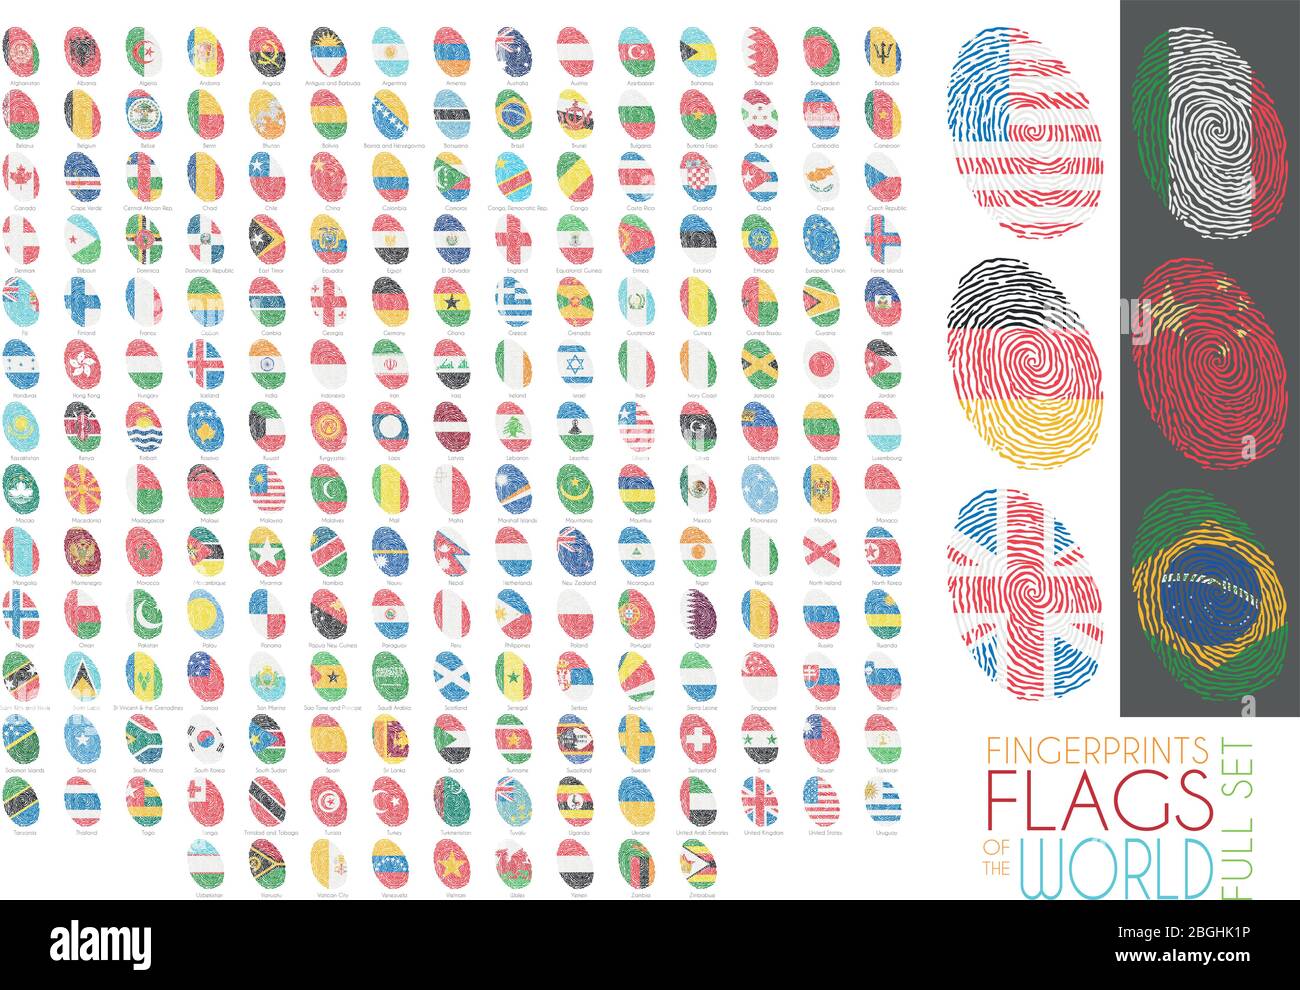 Set of 204 fingerprints colored with the national flags of all the sovereing countries of the world. Icon set Vector Illustration. Stock Vector